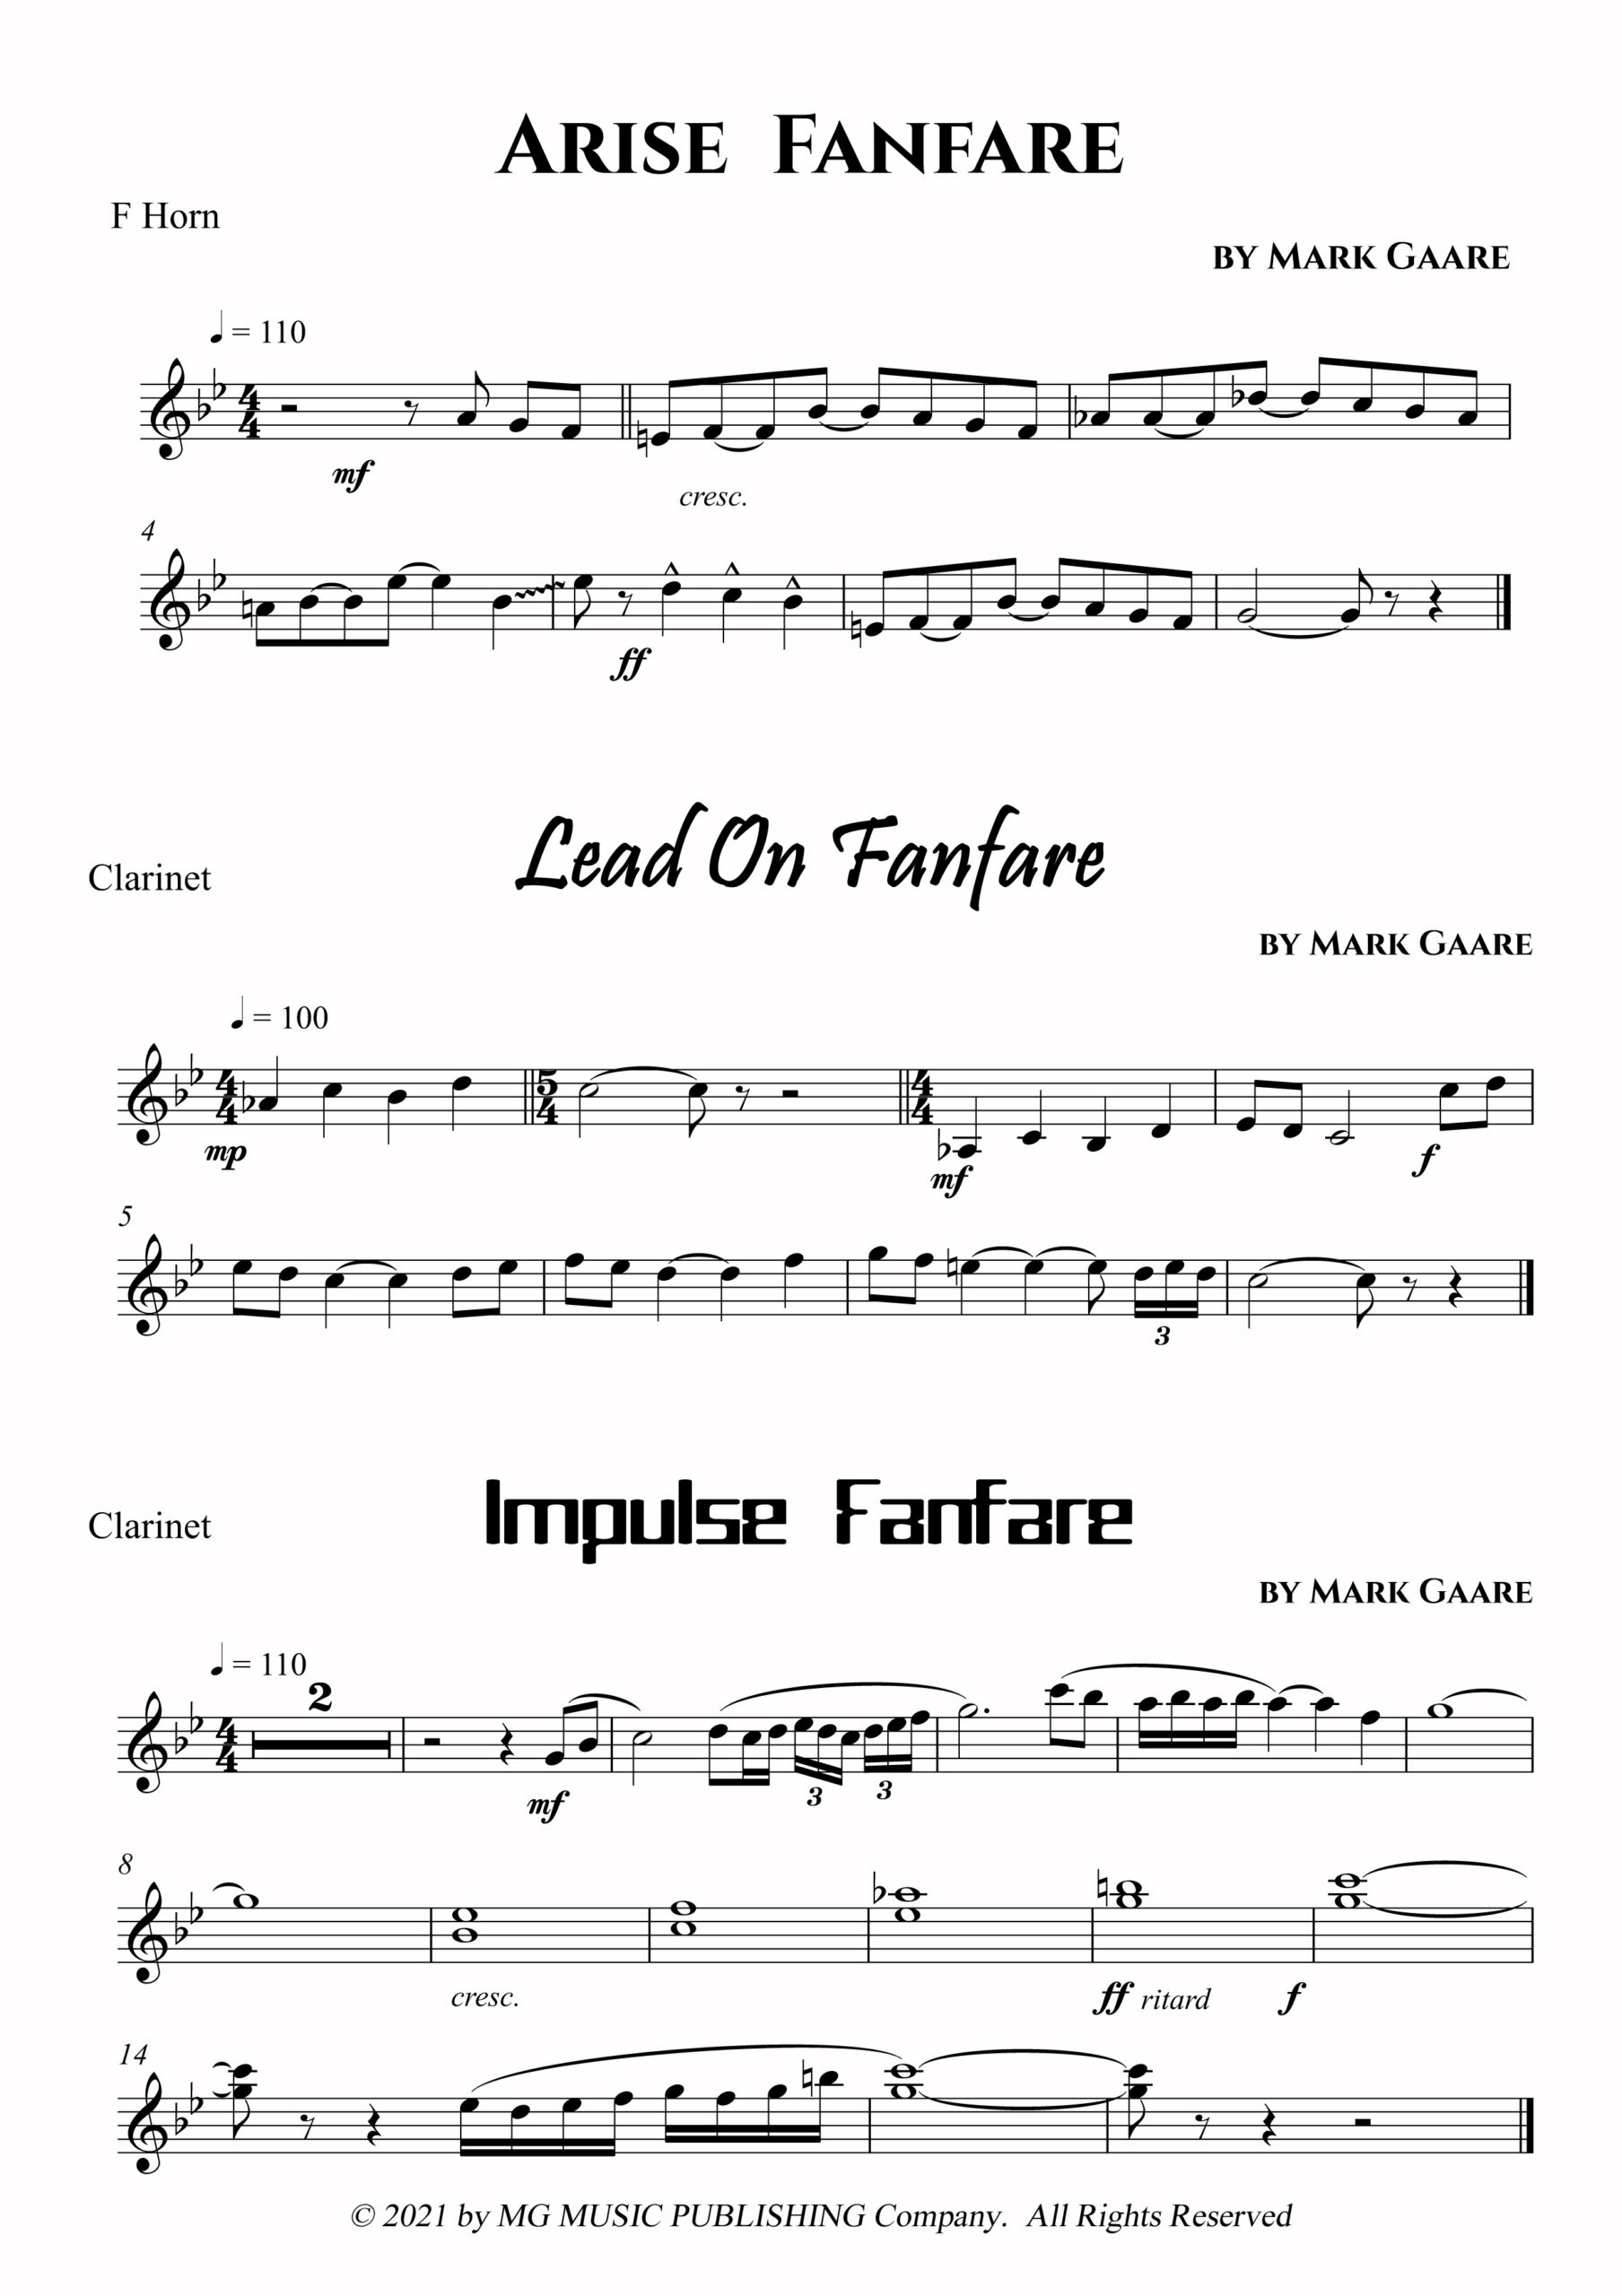 Fanfare Trio For Marching Or Concert Band - Sheet Music Marketplace